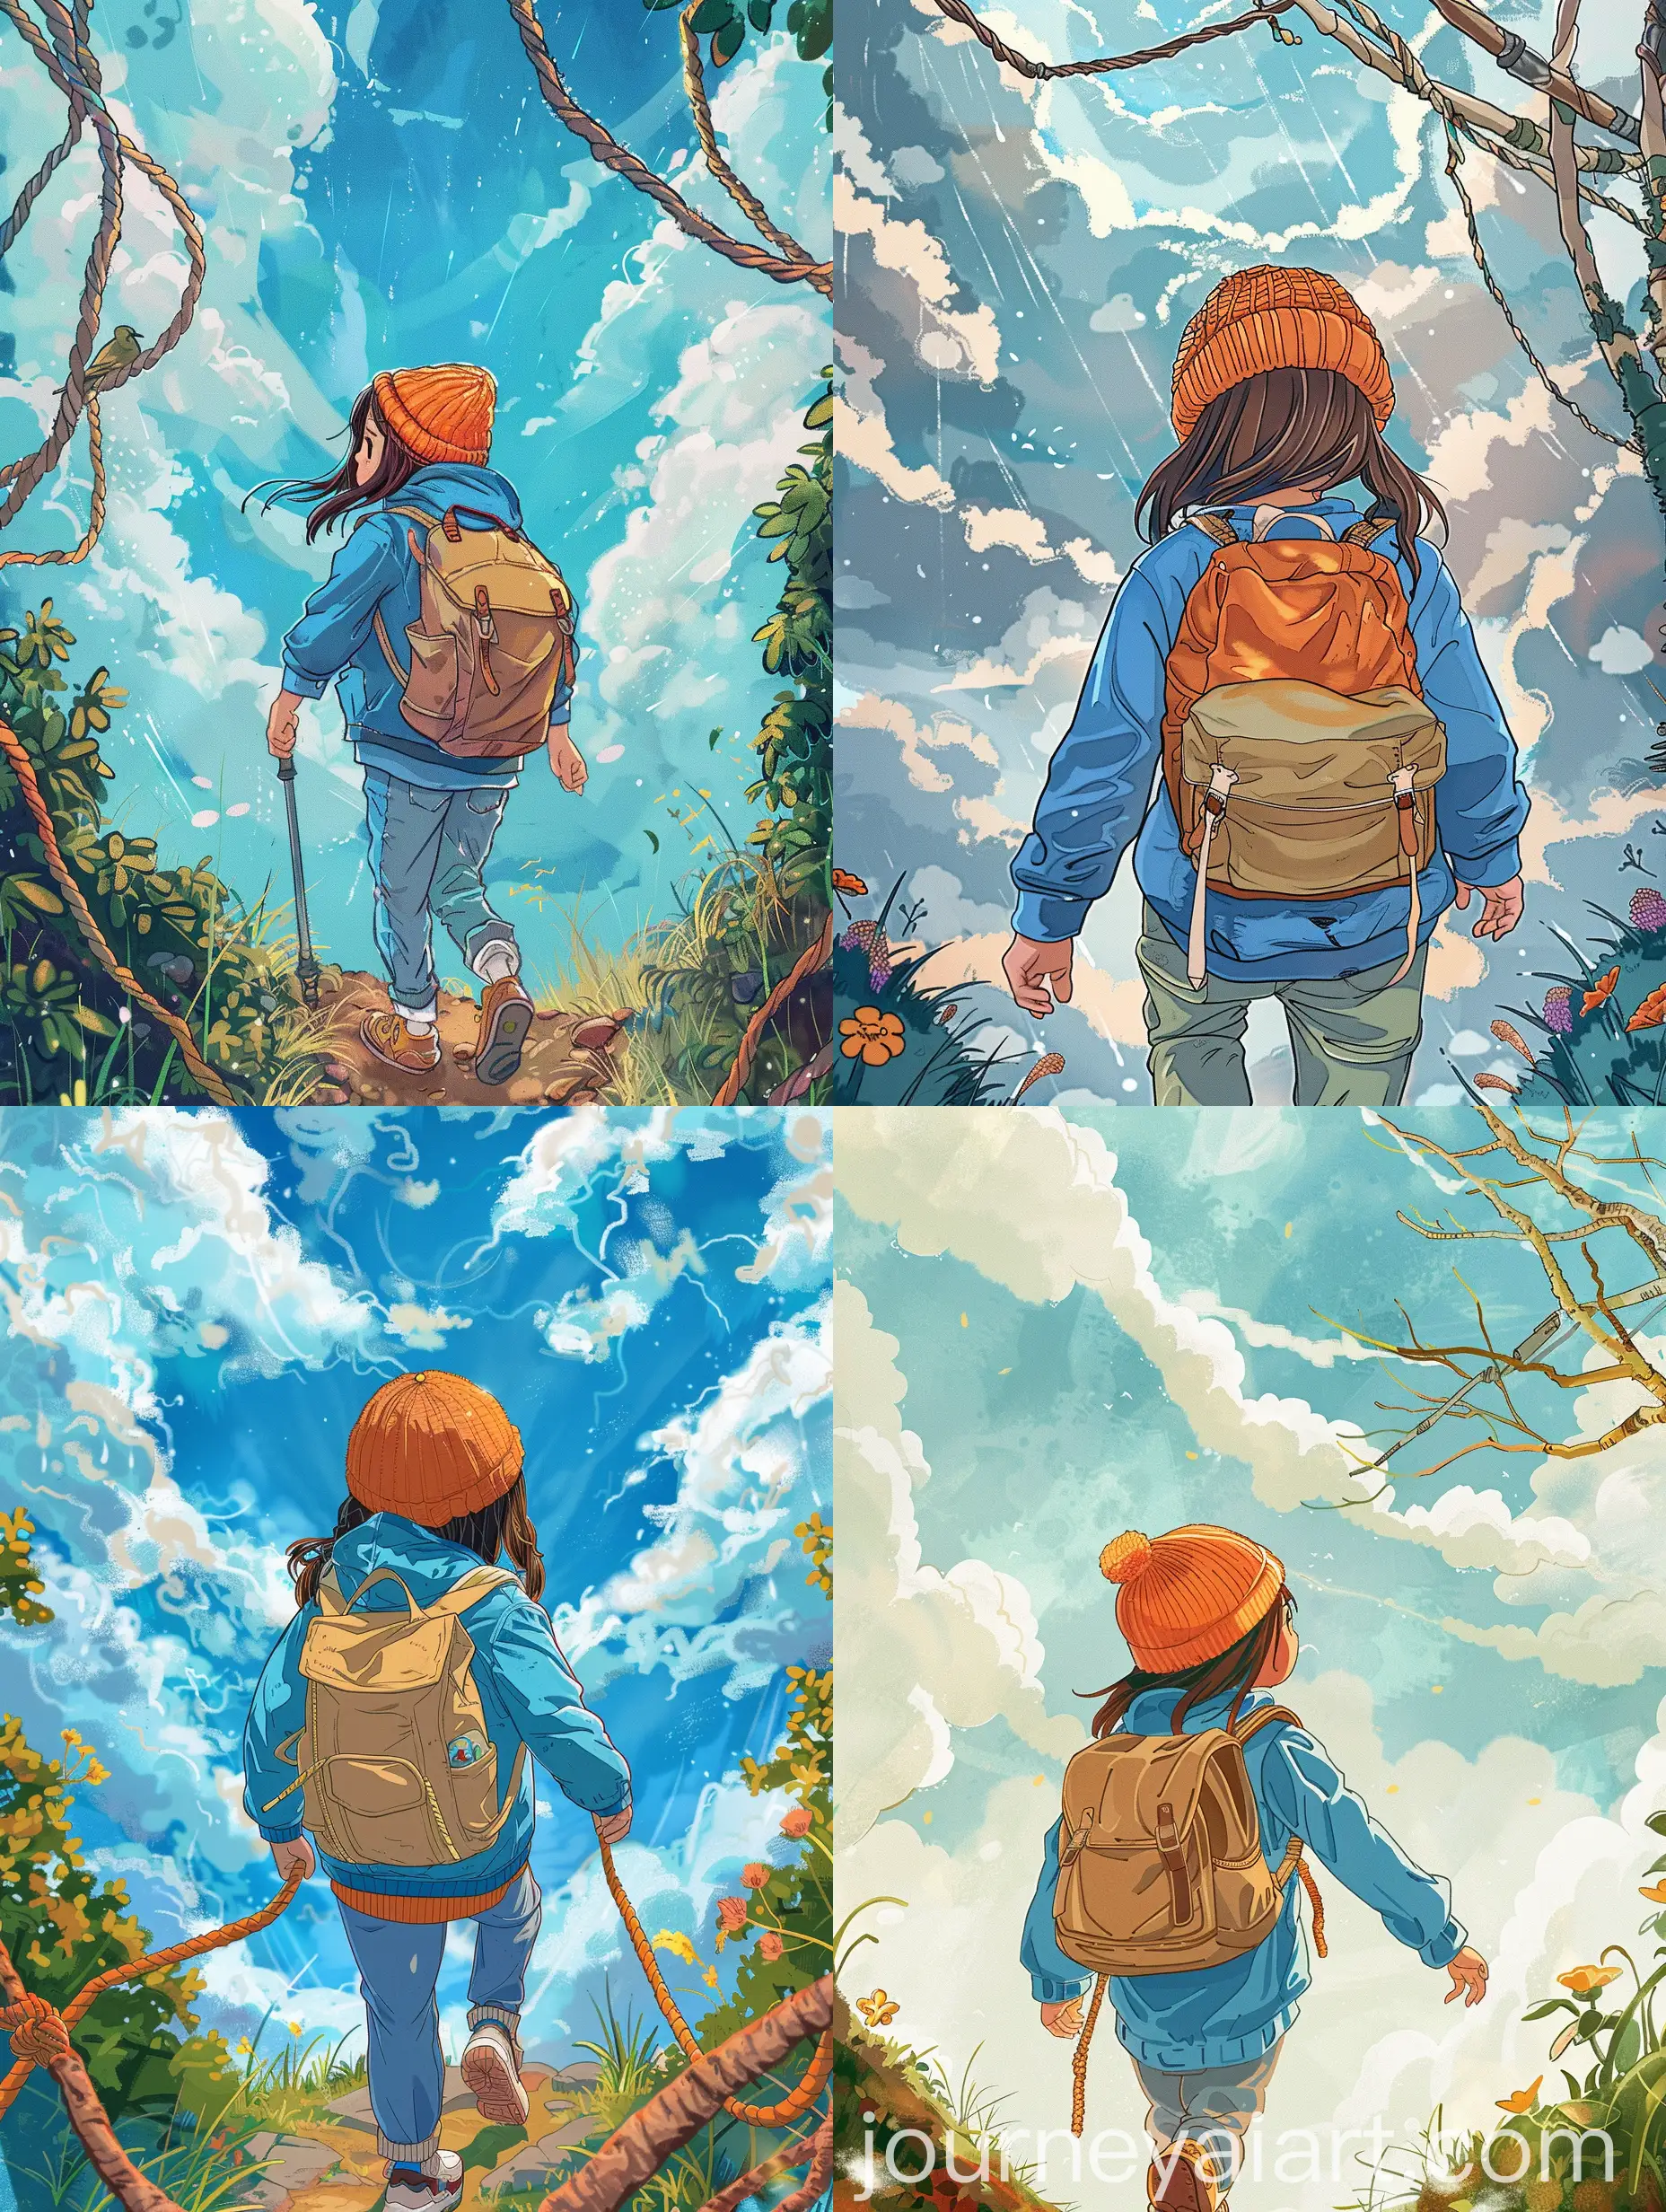 Luminous sky ,huge fluffy white clouds, a 6 year old girl walking in the pathway going to a hige tree uphil. She is wearing blue jacket, orange knitted sweather, light brown knitted hat, brown backpack, and blue hiking pants. Summervibes.,flowers,grasses Vibrant colors, Studio ghibli style. Children's book illustration style.